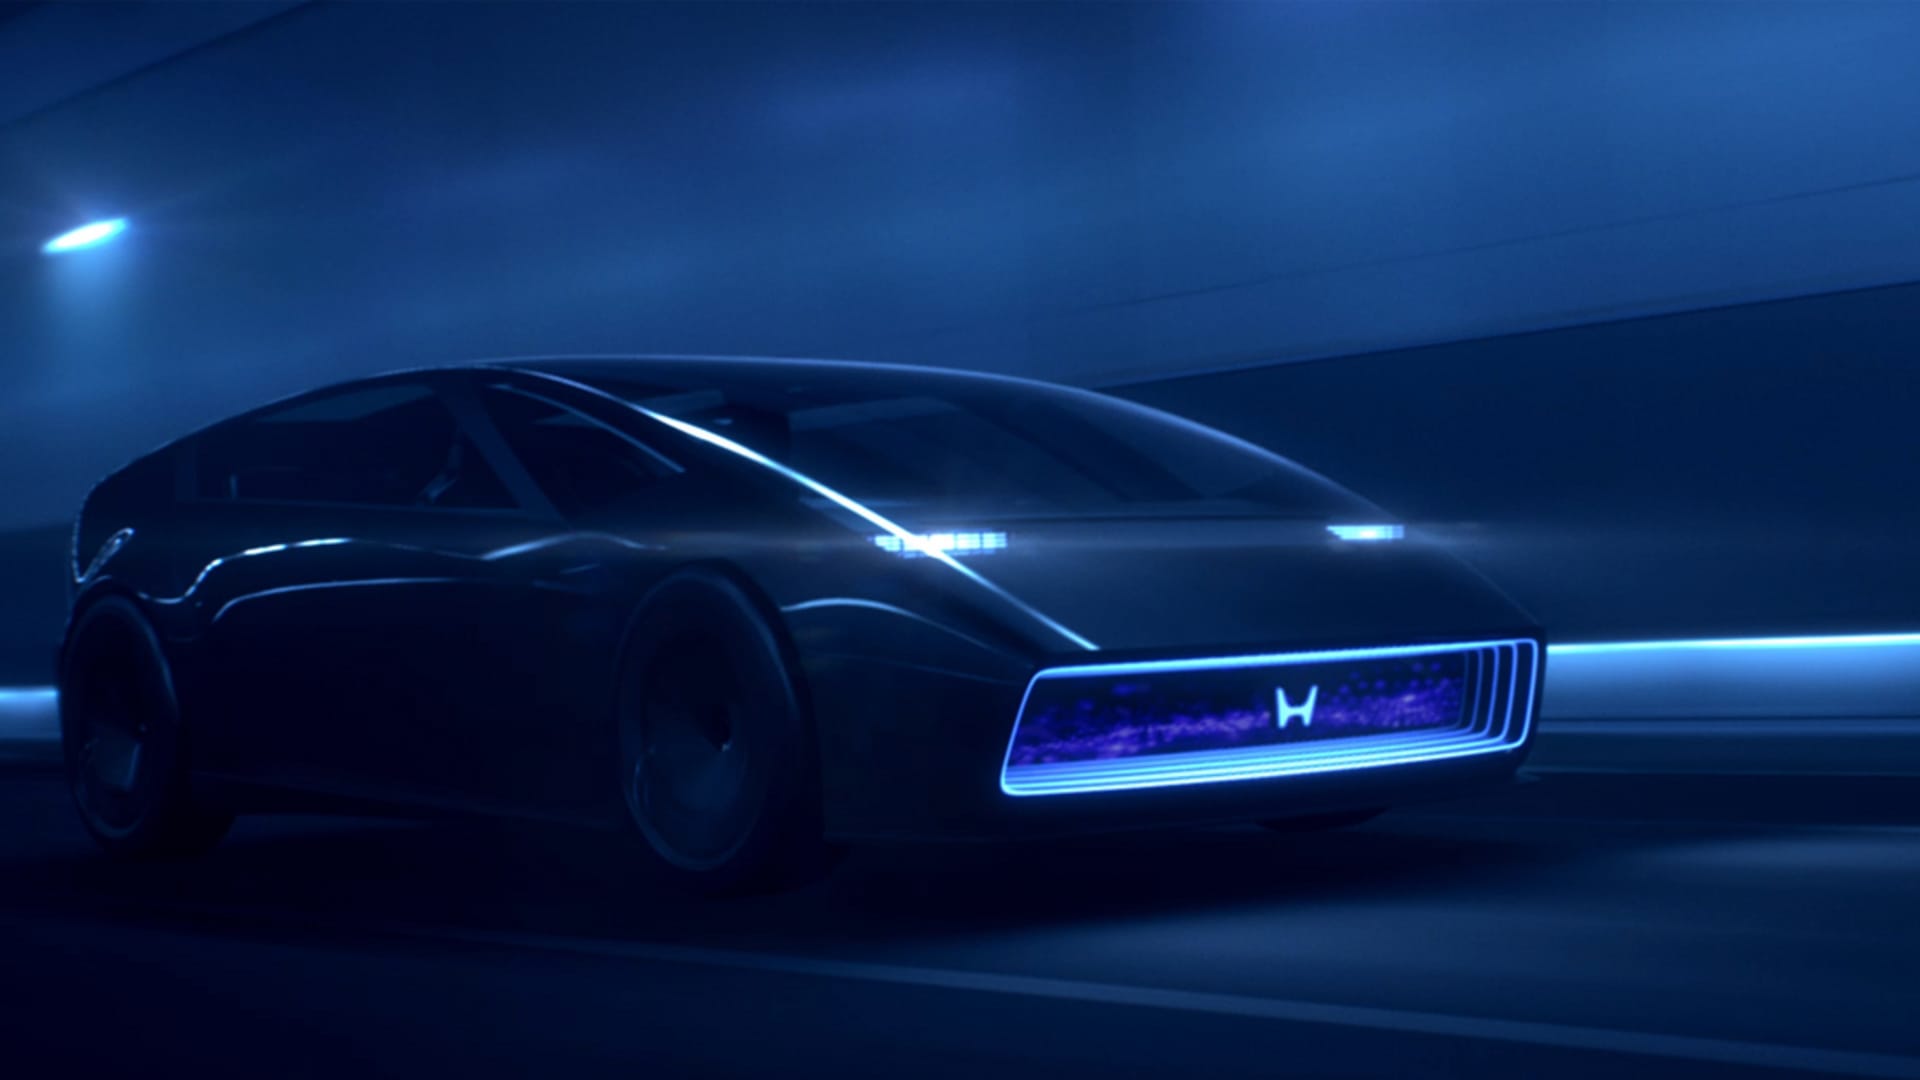 Honda unveils new electric cars with futuristic 'Space-Hud' and 'Saloon' concepts